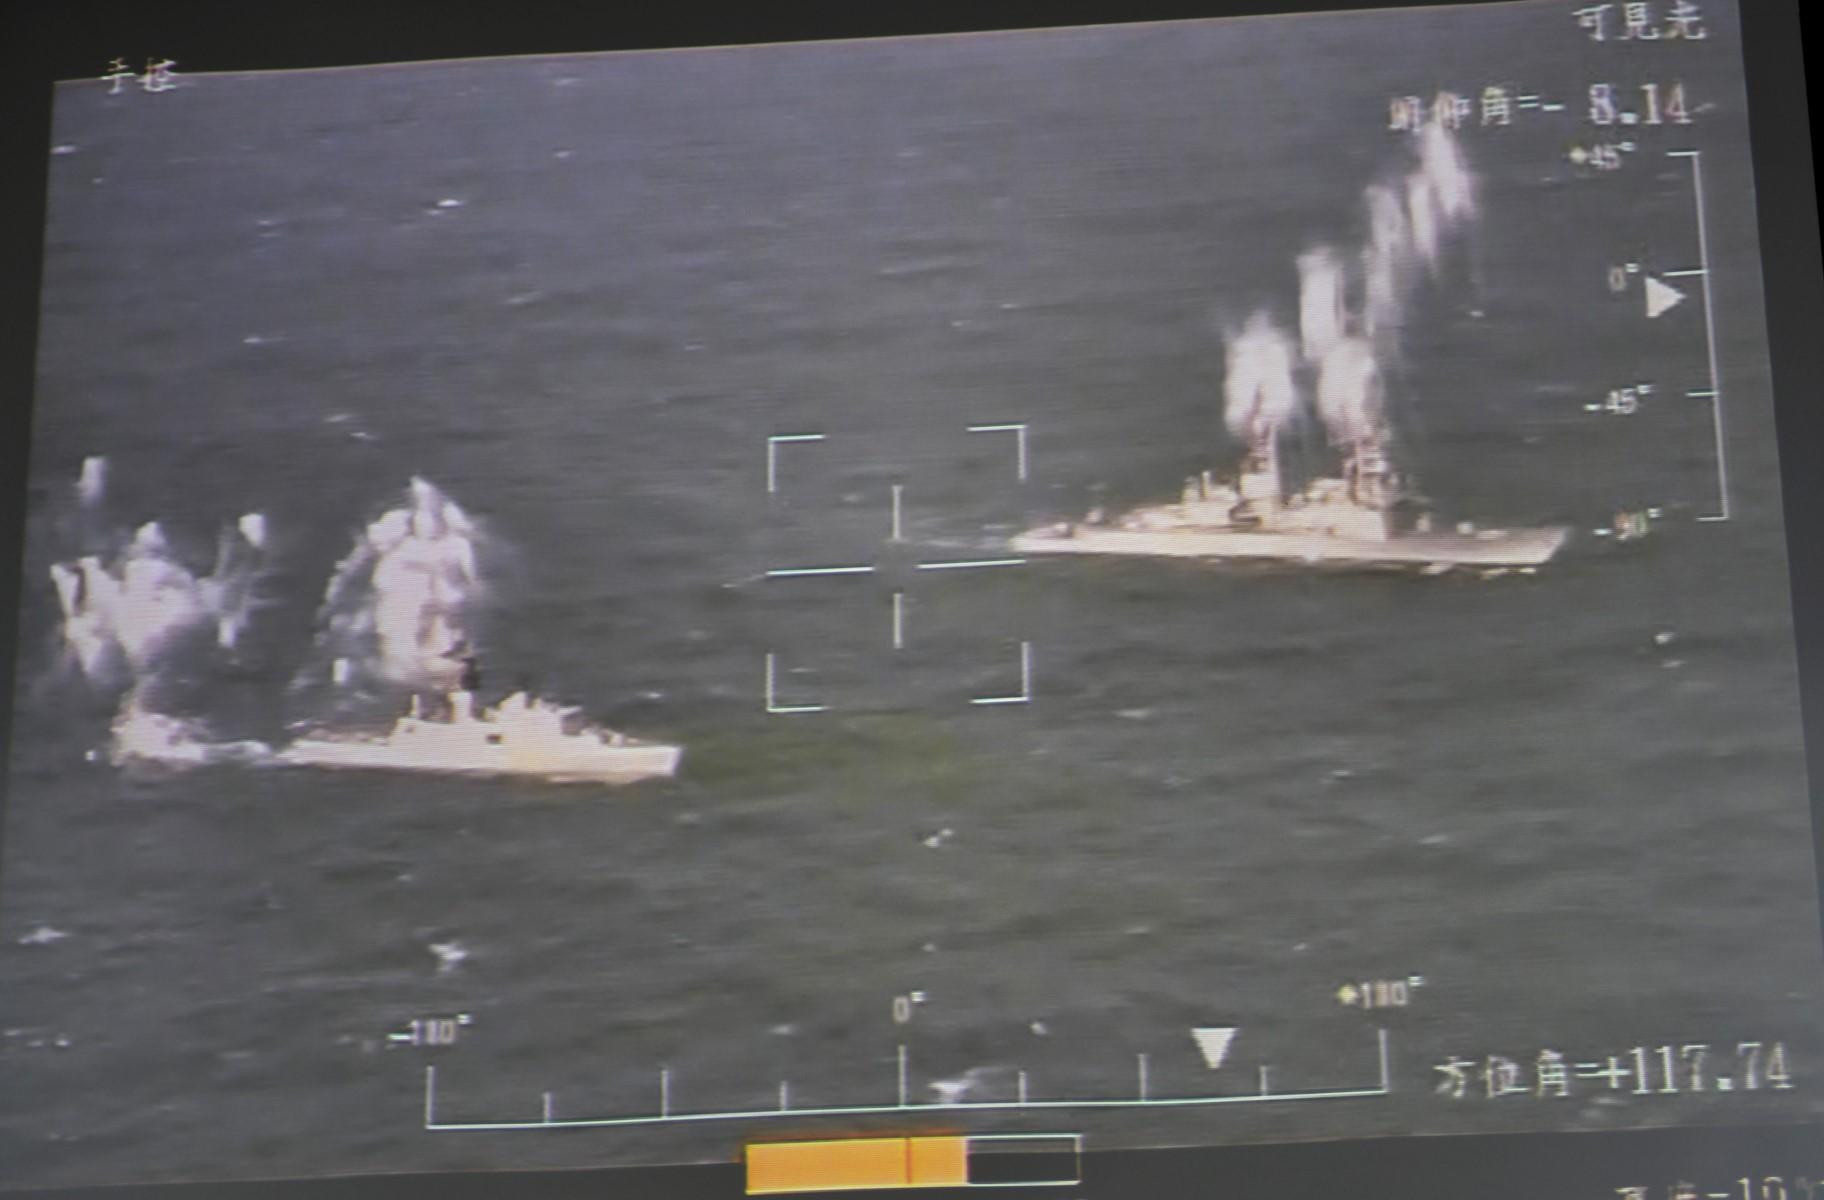 Warships launching countermeasures are seen on a screen showing a real-time feed from an indigenously-made Rui Yuan unmanned aerial vehicle (UAV), during a military exercise at the Pingtung Air Force Base in southern Taiwan on Jan 24, 2019. Photo: AFP